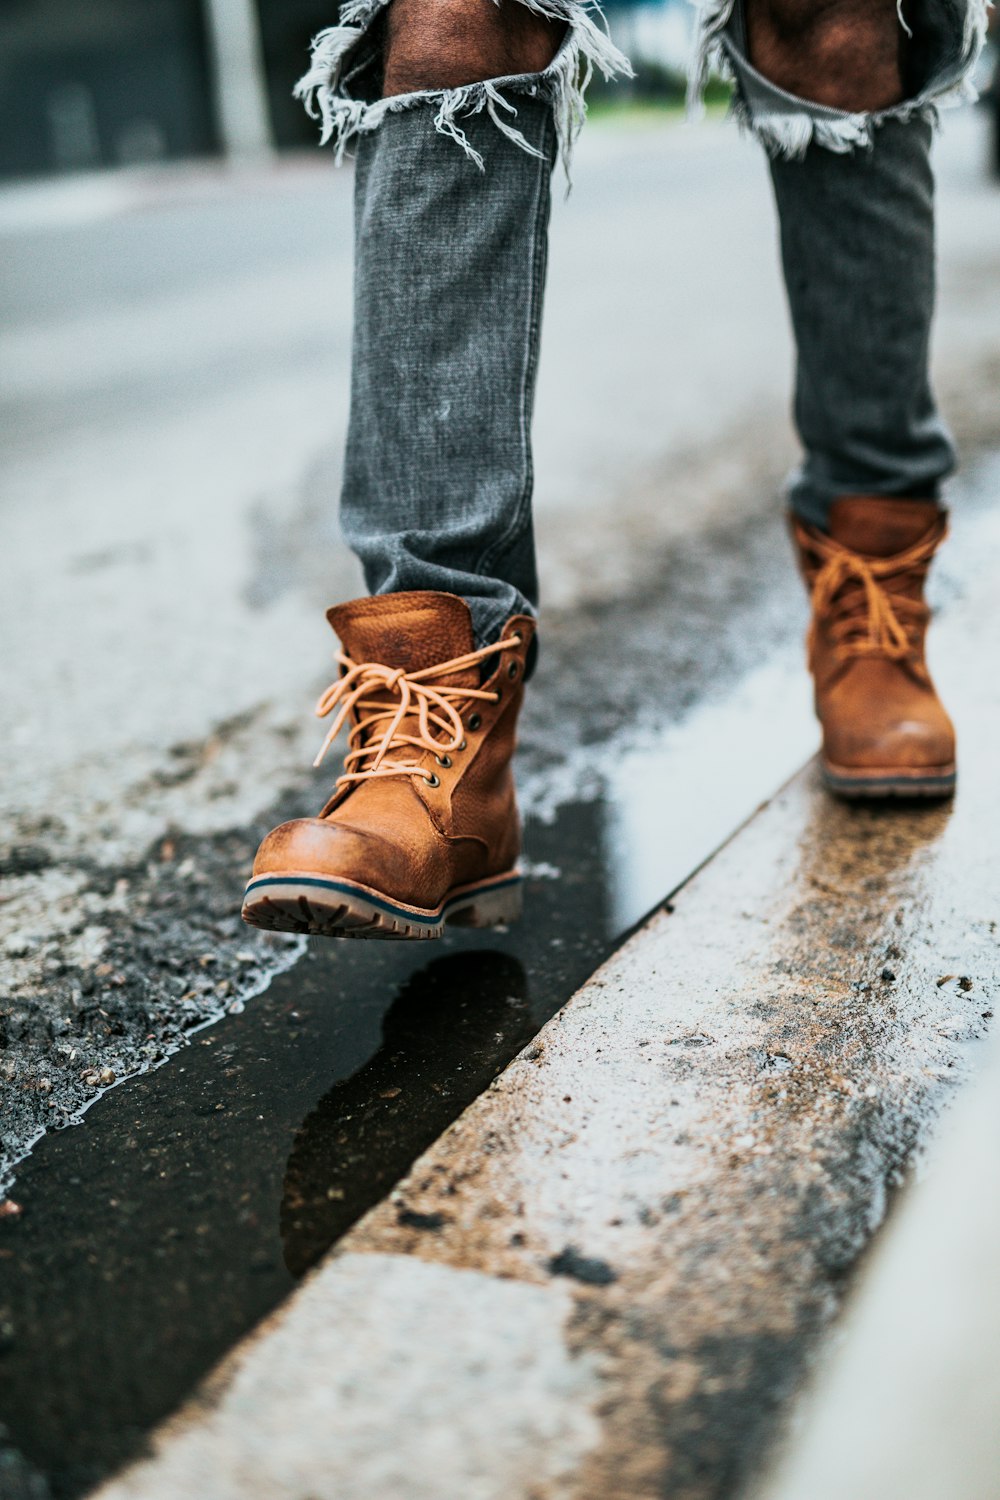 person in gray jeans and brown leather boots walking on road